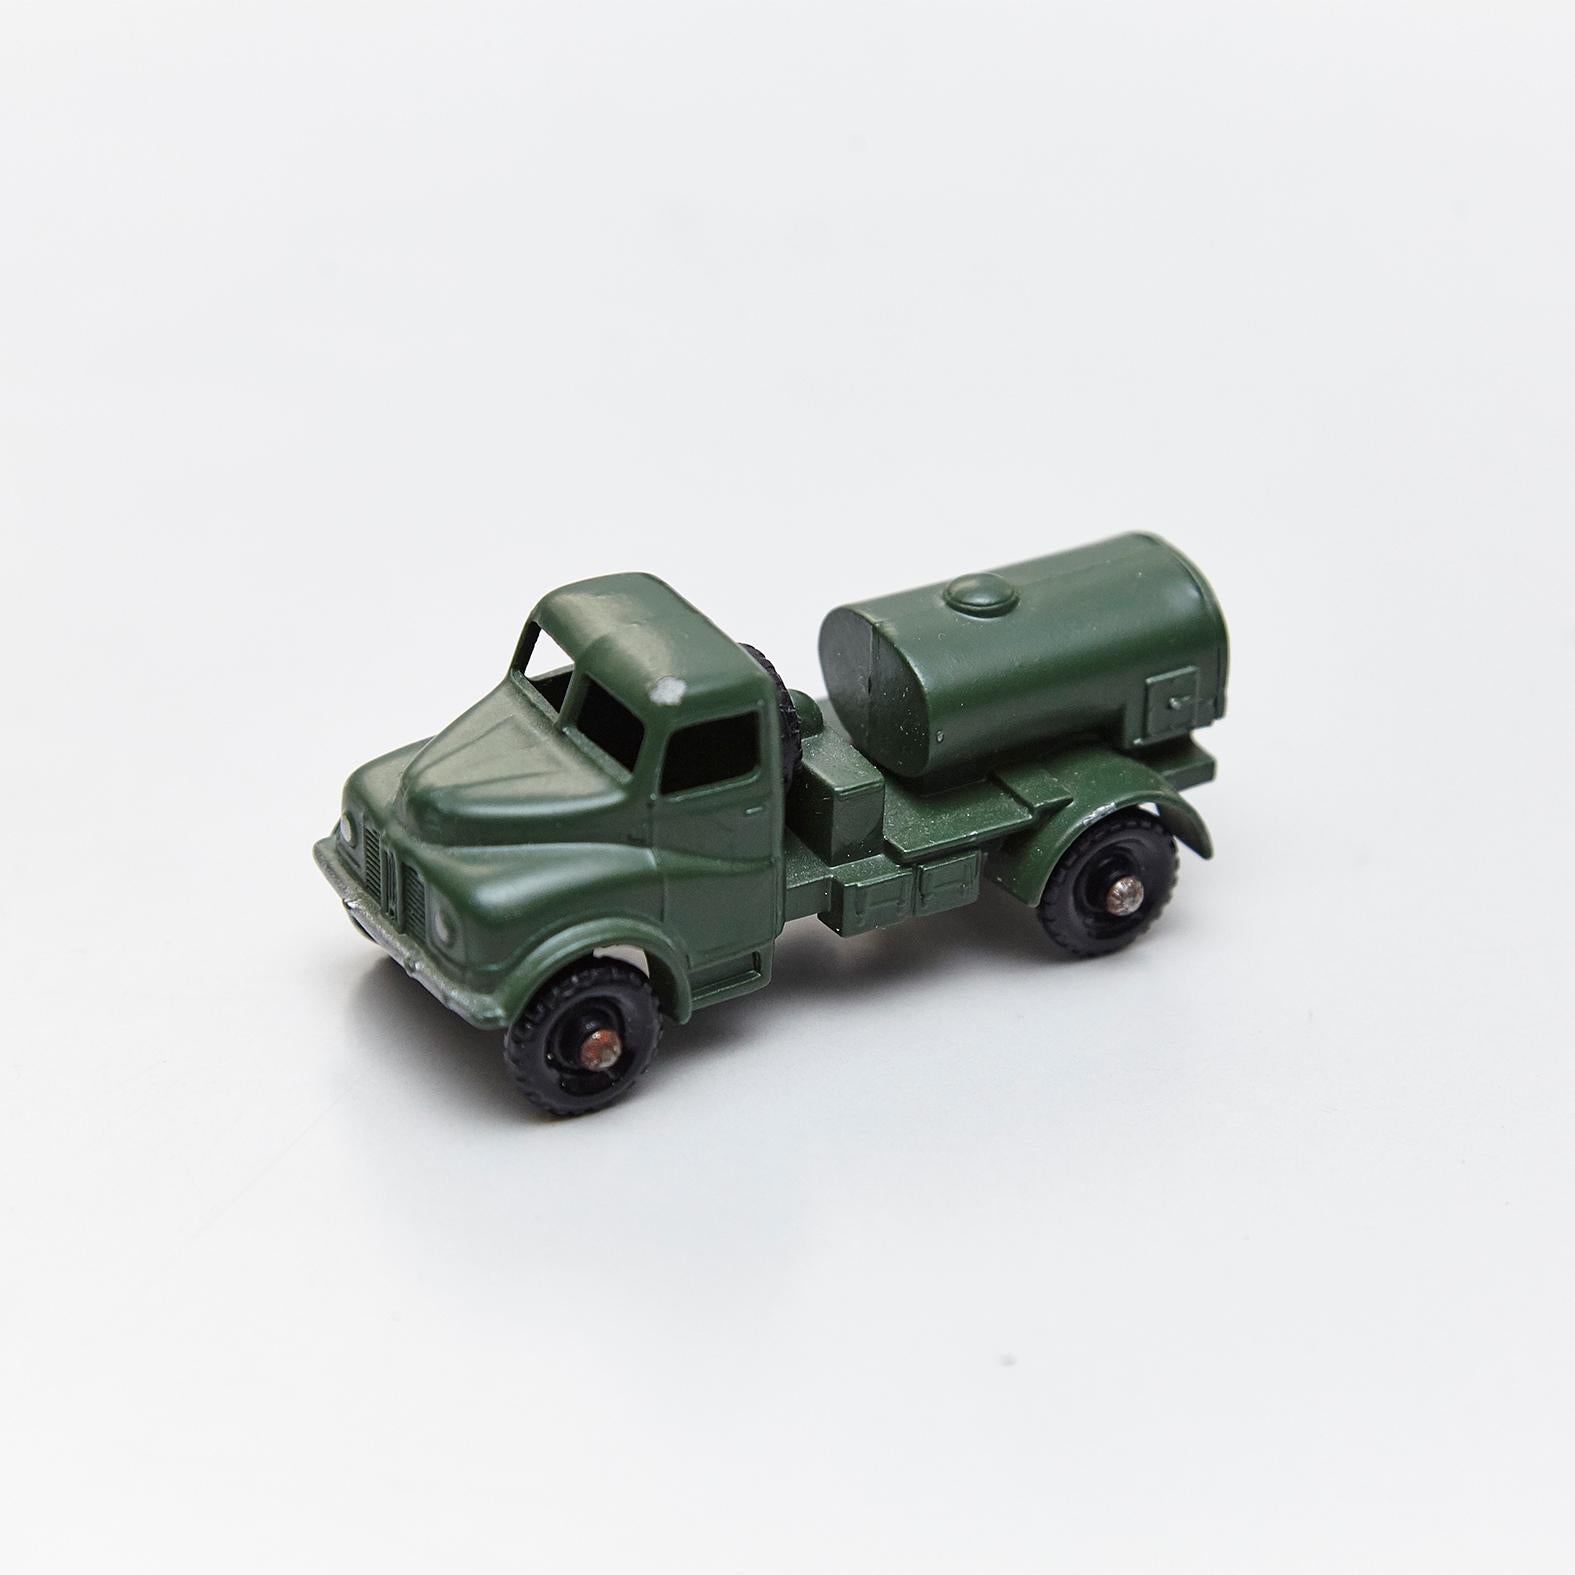 Lesney Matchboxes Series Antique Metal Toy Cars Green Military - Free Shipping 3